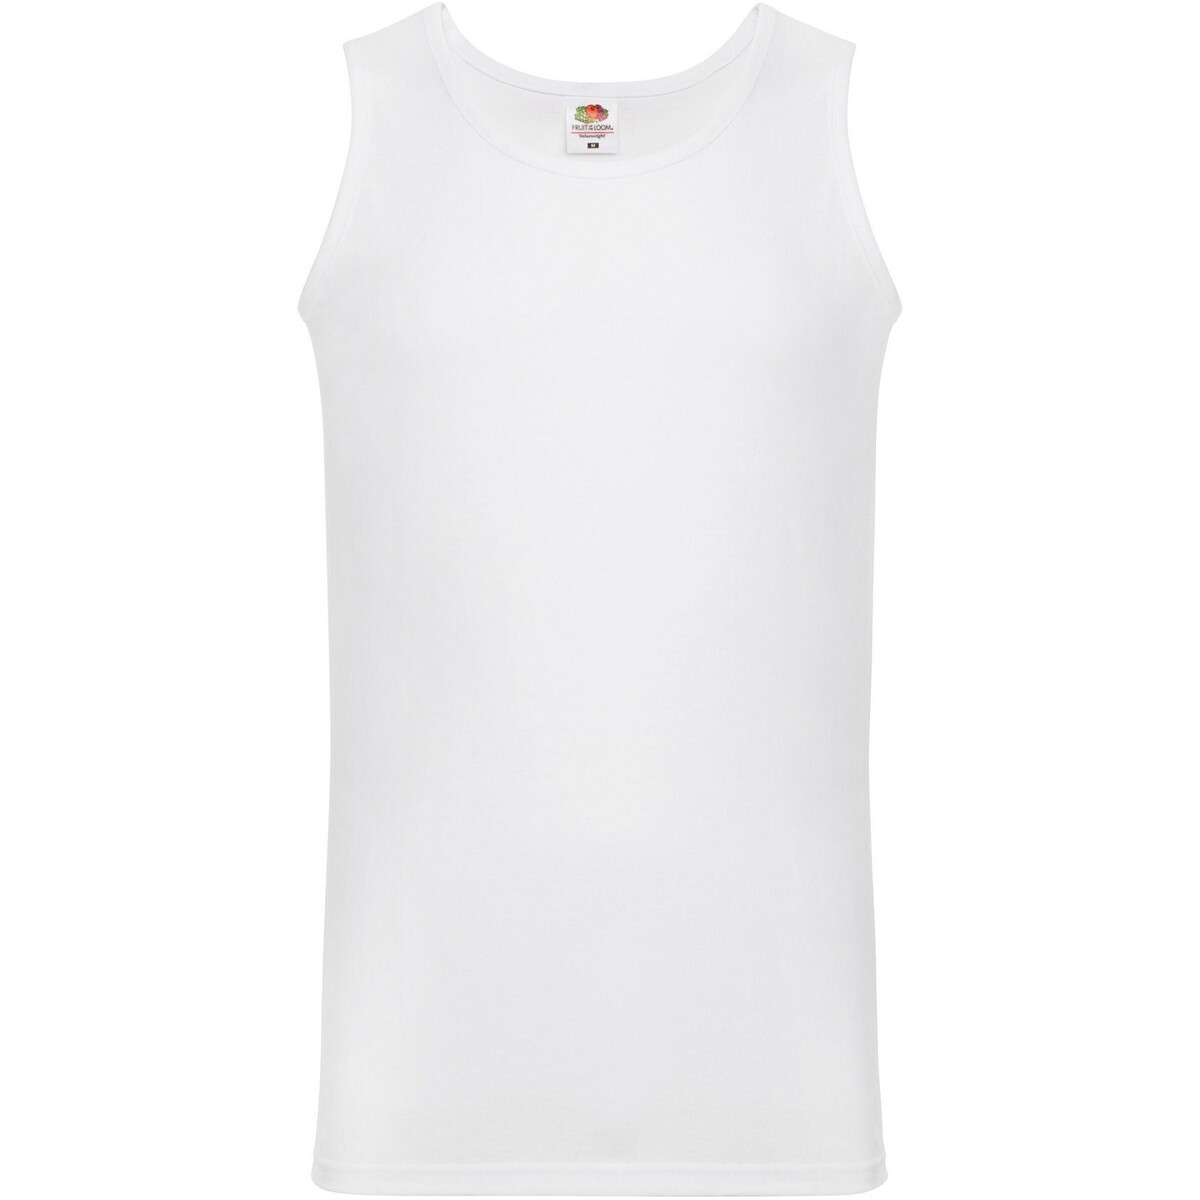 textil Hombre Camisetas sin mangas Fruit Of The Loom Valueweight Blanco